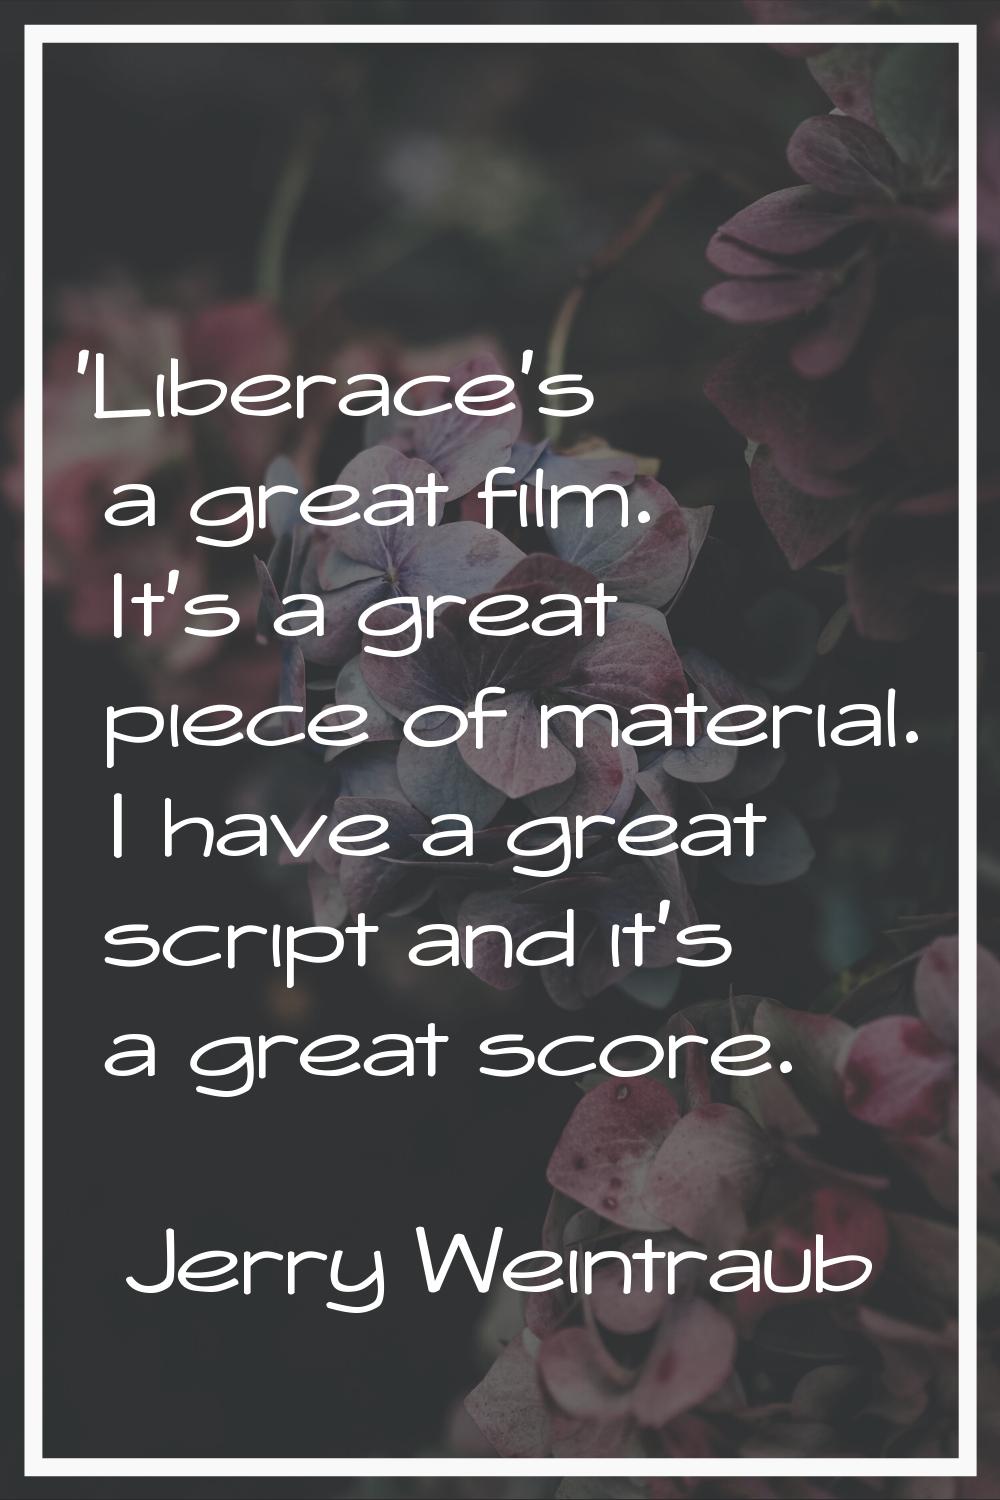 'Liberace's a great film. It's a great piece of material. I have a great script and it's a great sc